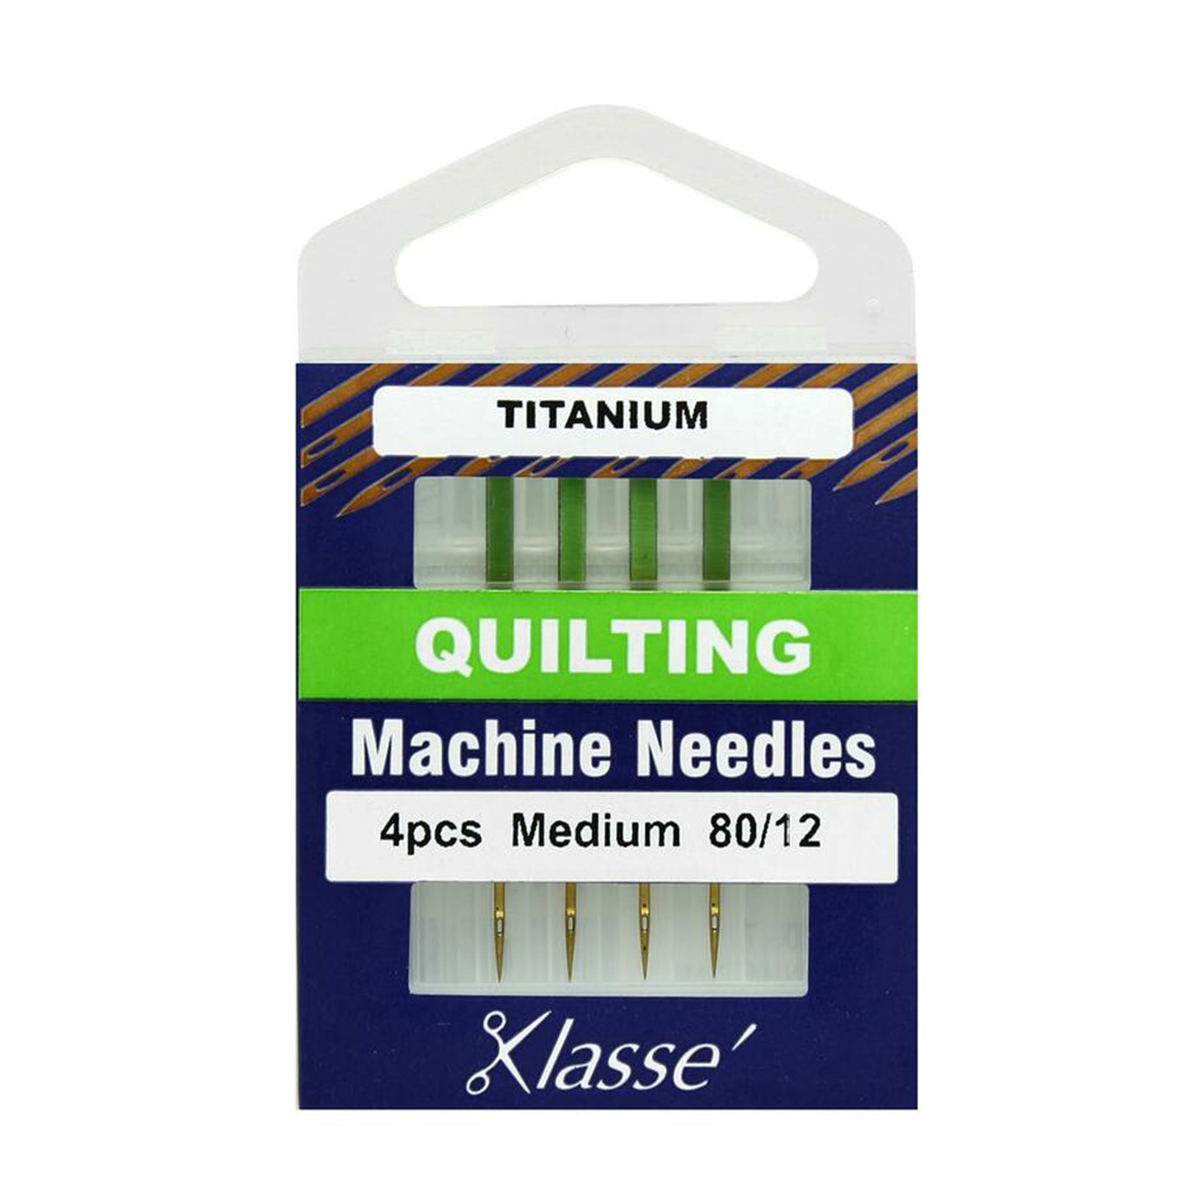 Magic Quilting Pins with Case - 1.75 - 50 ct - Pins - Pins & Needles -  Notions